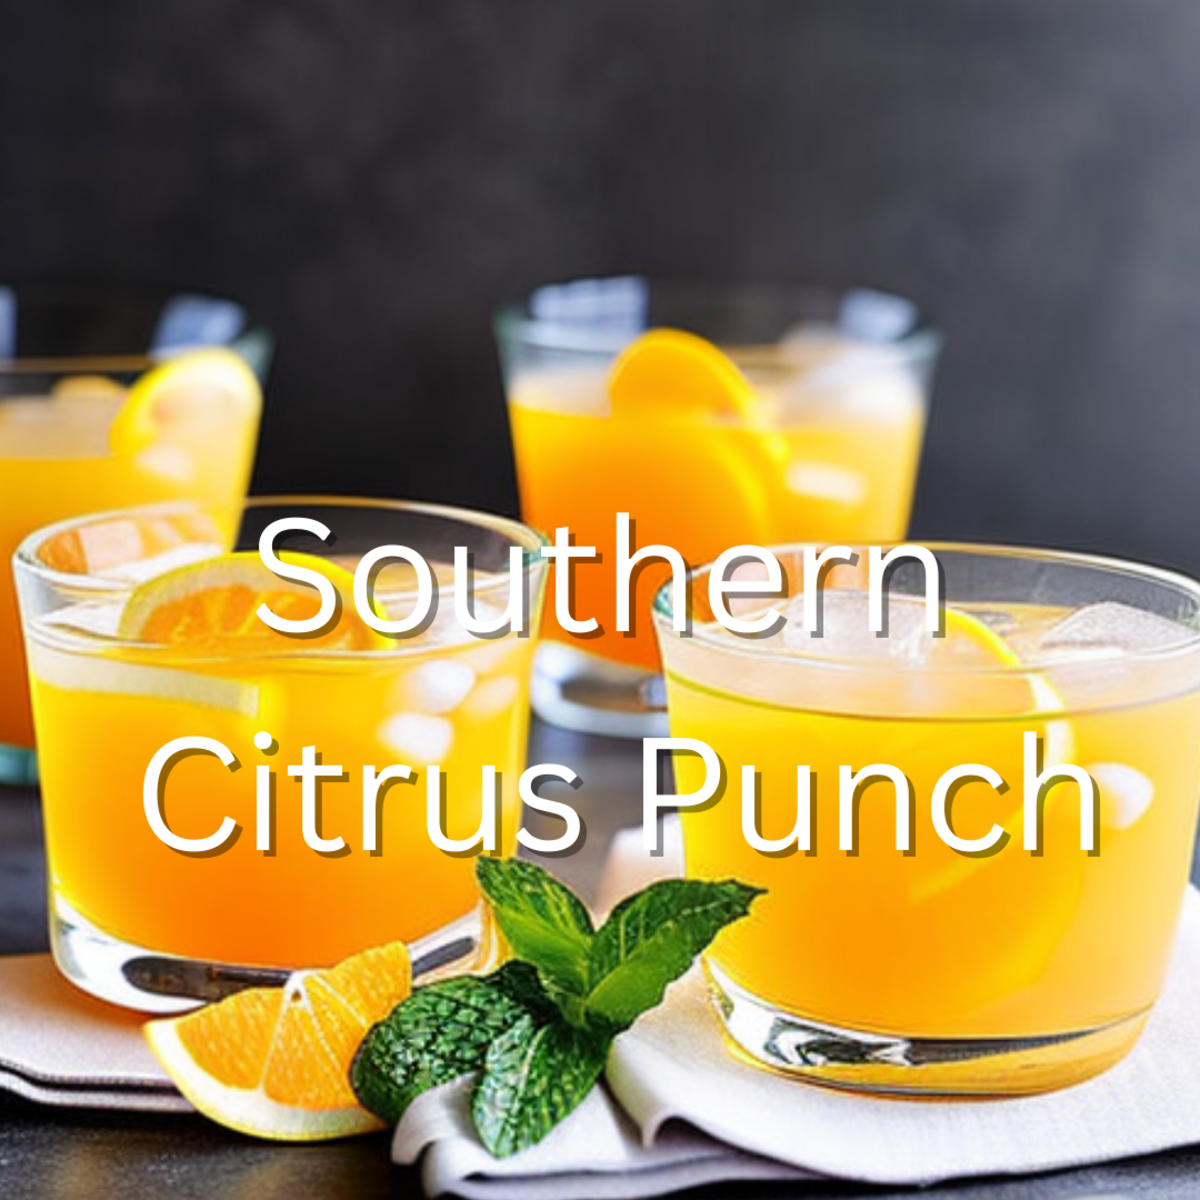 Southern Citrus Punch